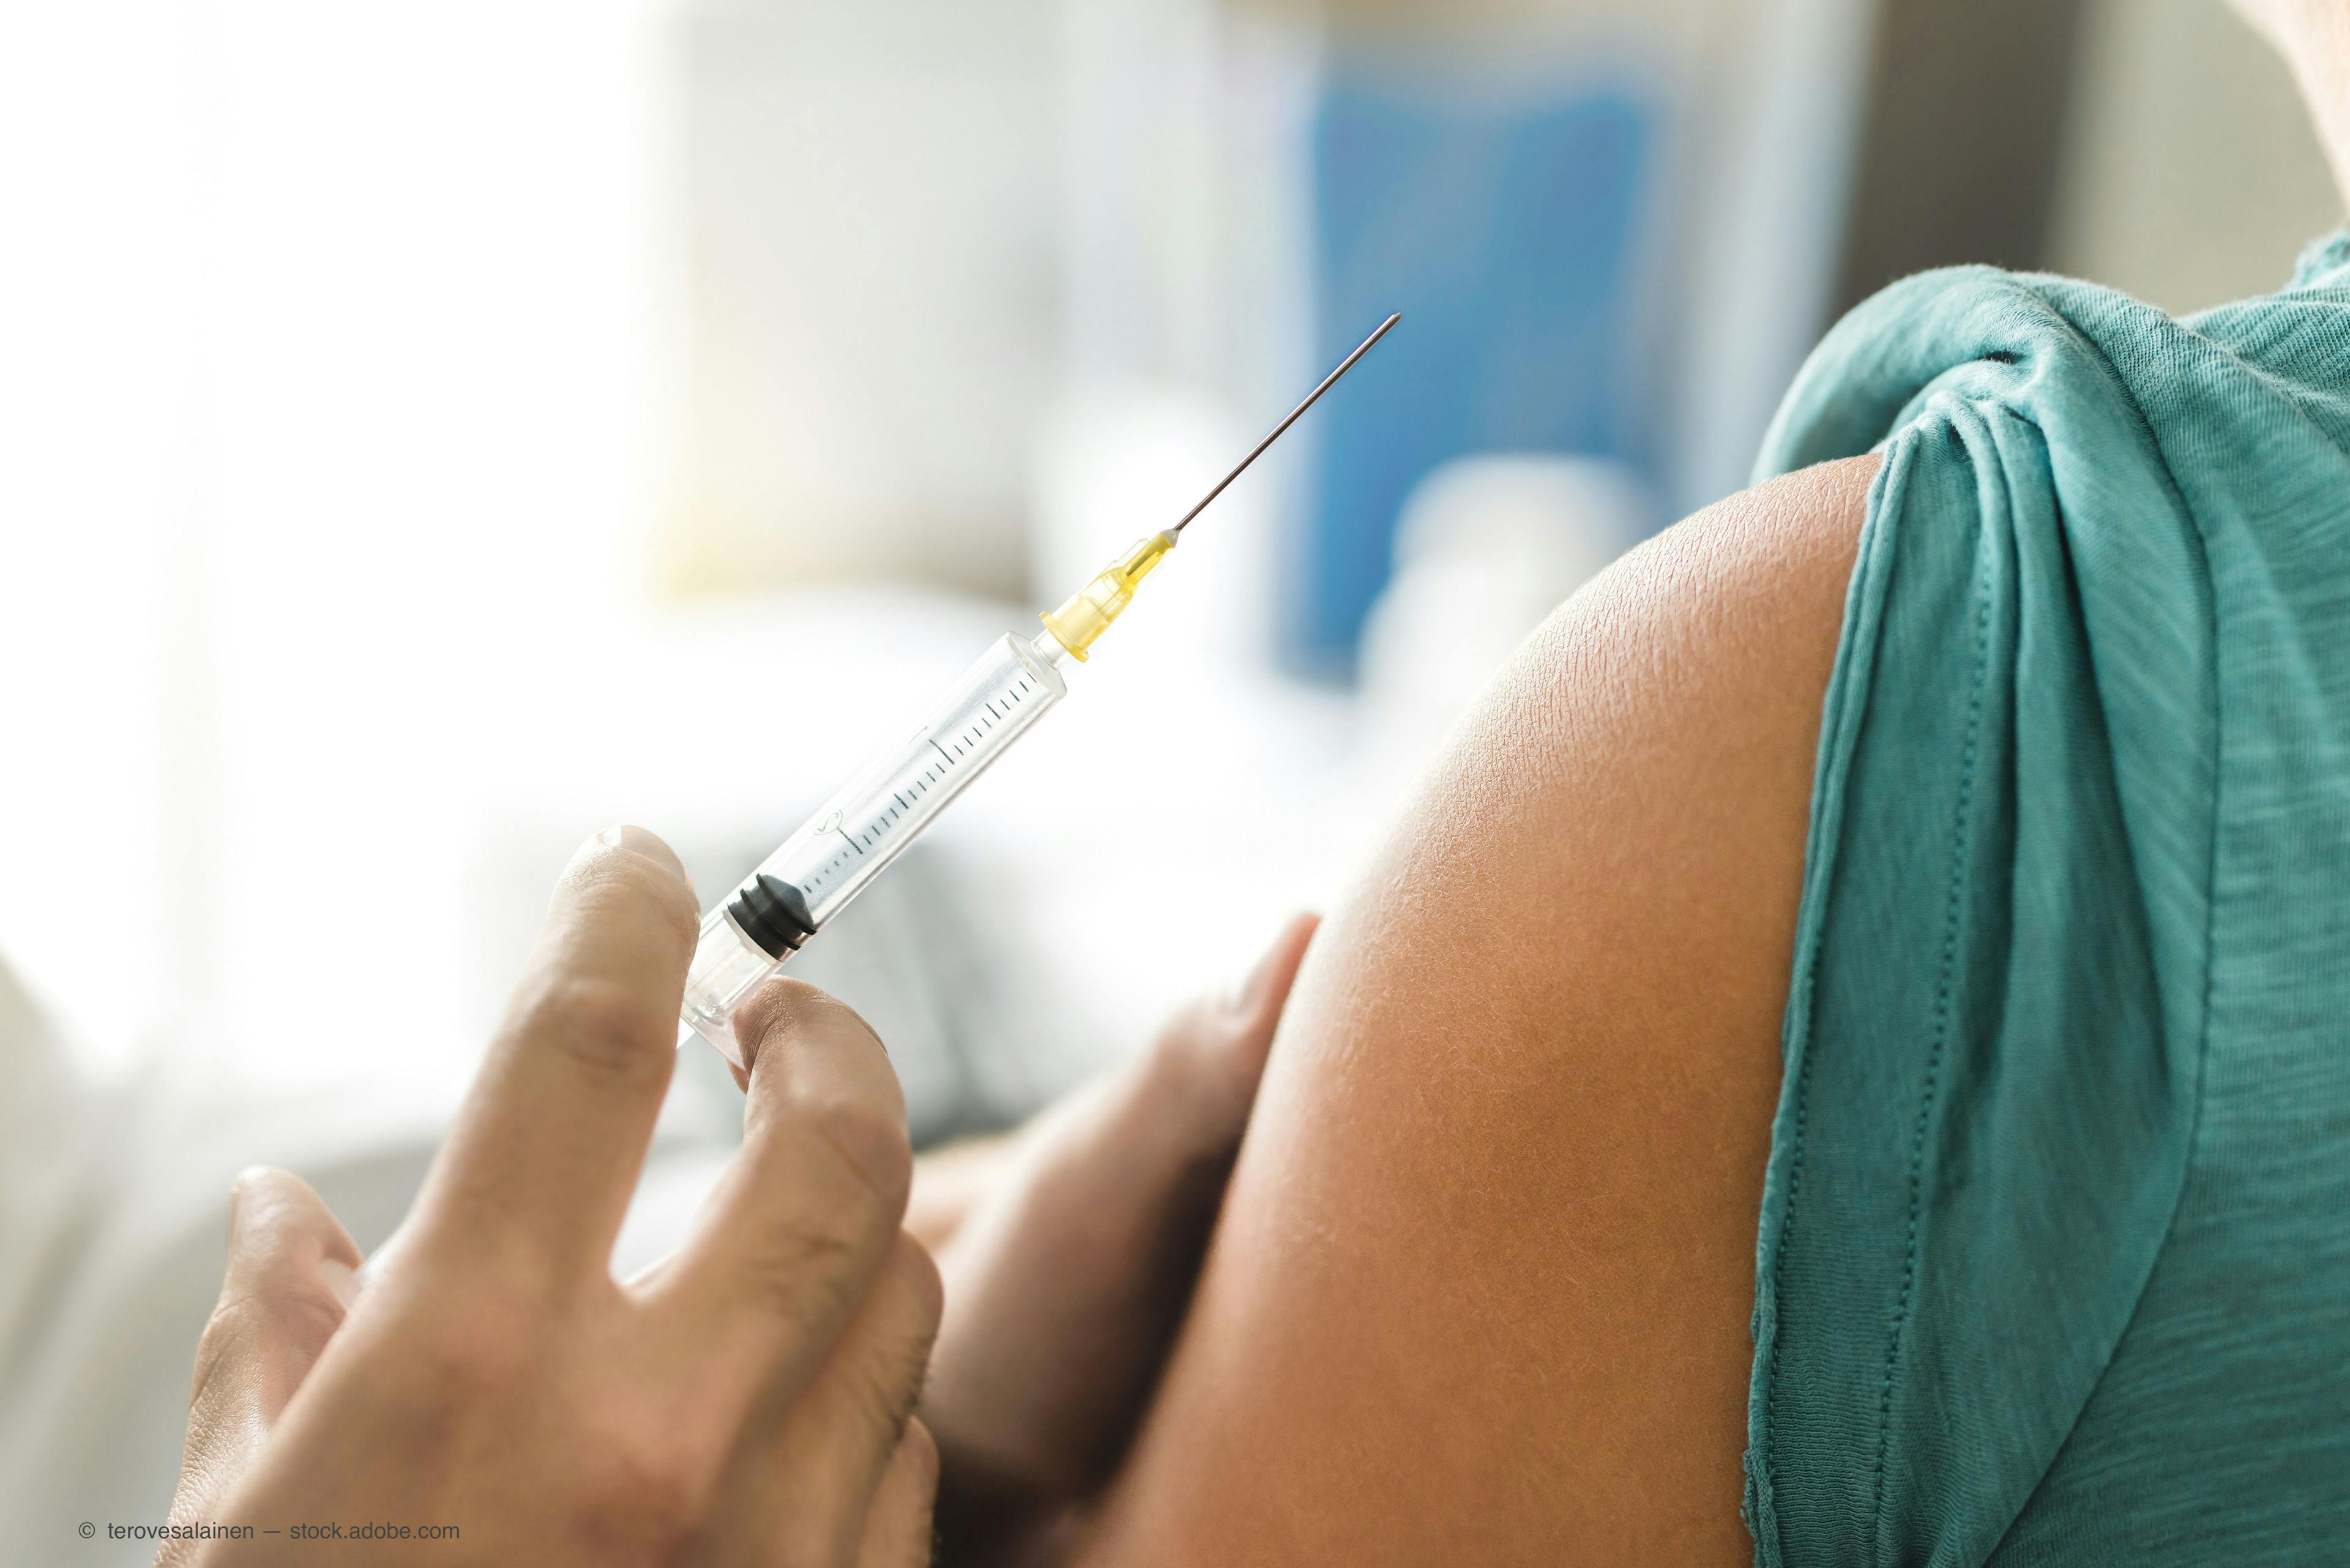 Investigators in the United Kingdom found that concomitant vaccination of flu and COVID-19 raised no safety concerns and preserved the immune response to both vaccines.